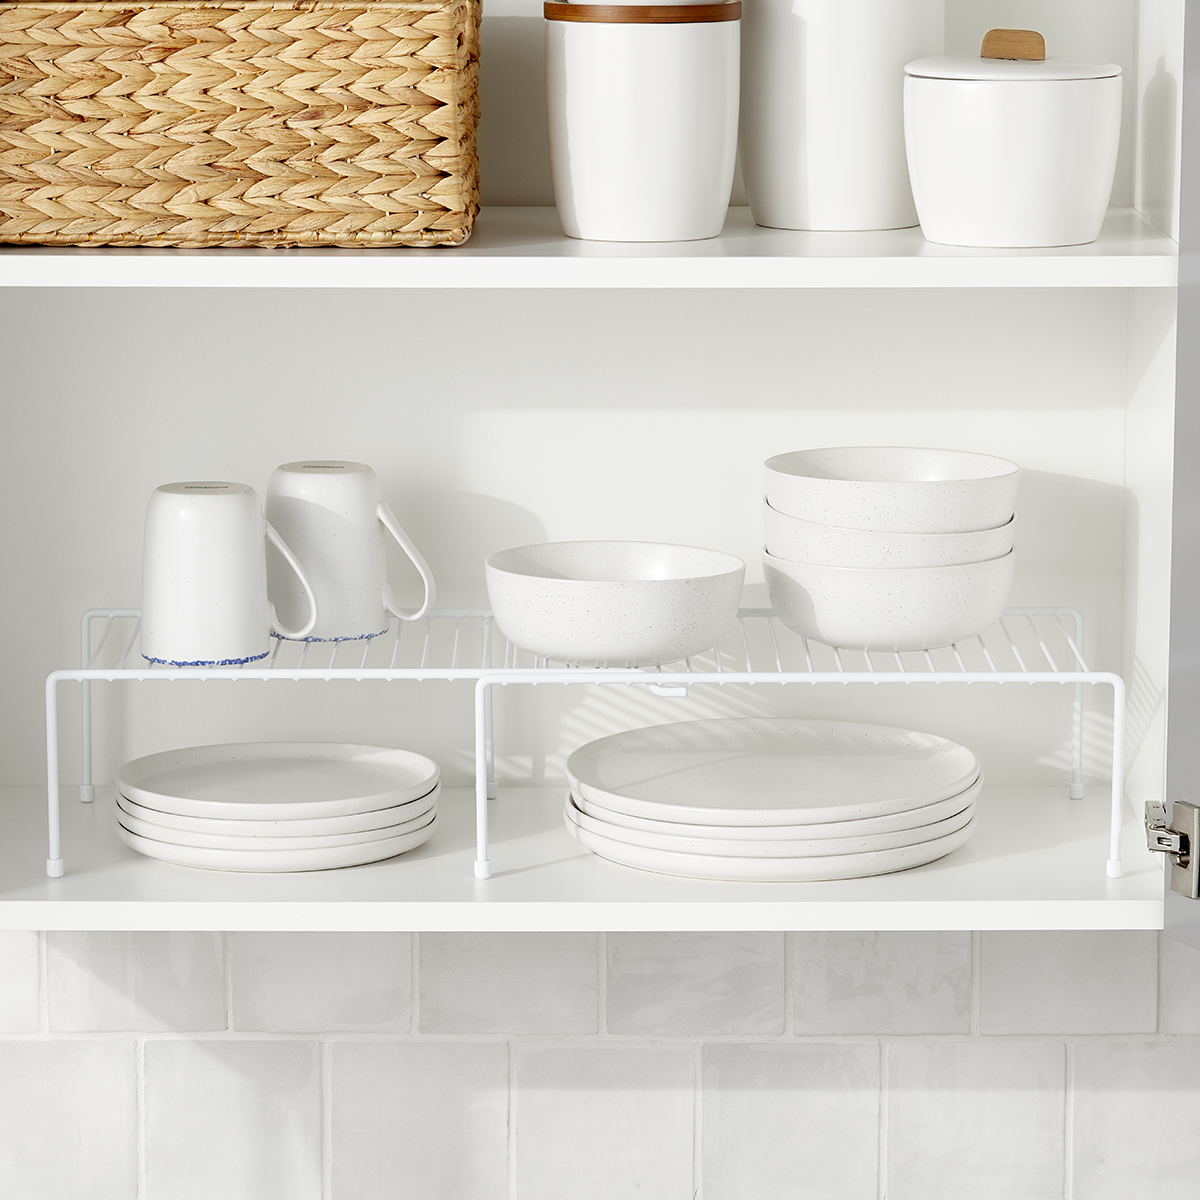 https://www.containerstore.com/catalogimages/420326/10077515_WireShelf_LargeExpanding-Wh.jpg